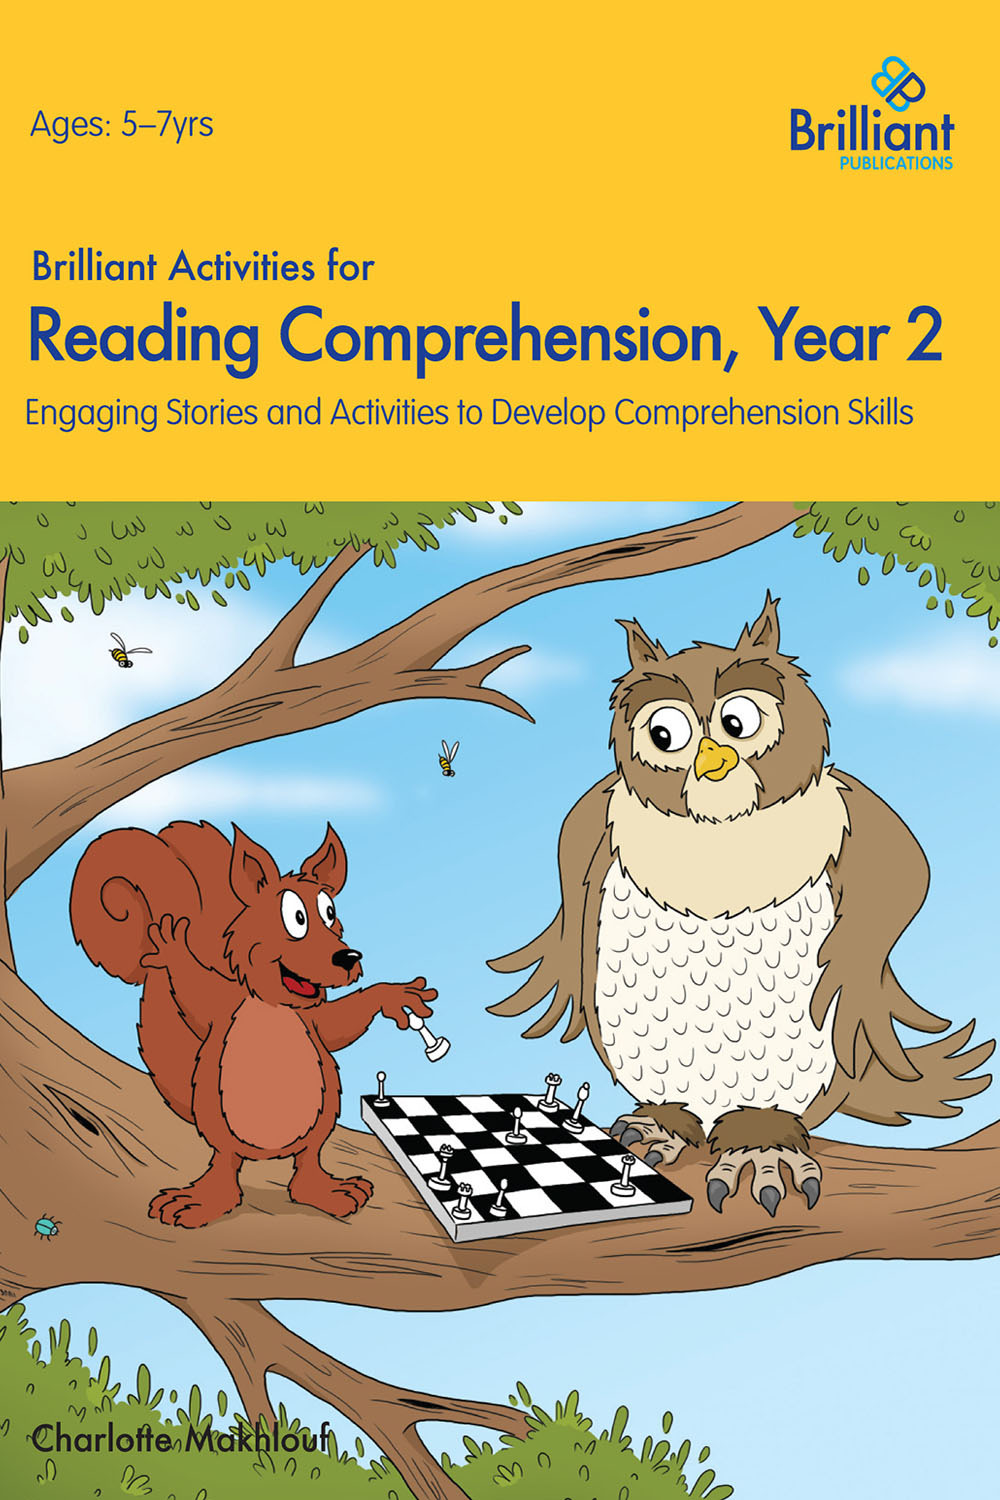 Makhlouf, Charlotte - Brilliant Activities for Reading Comprehension Year 2, e-kirja